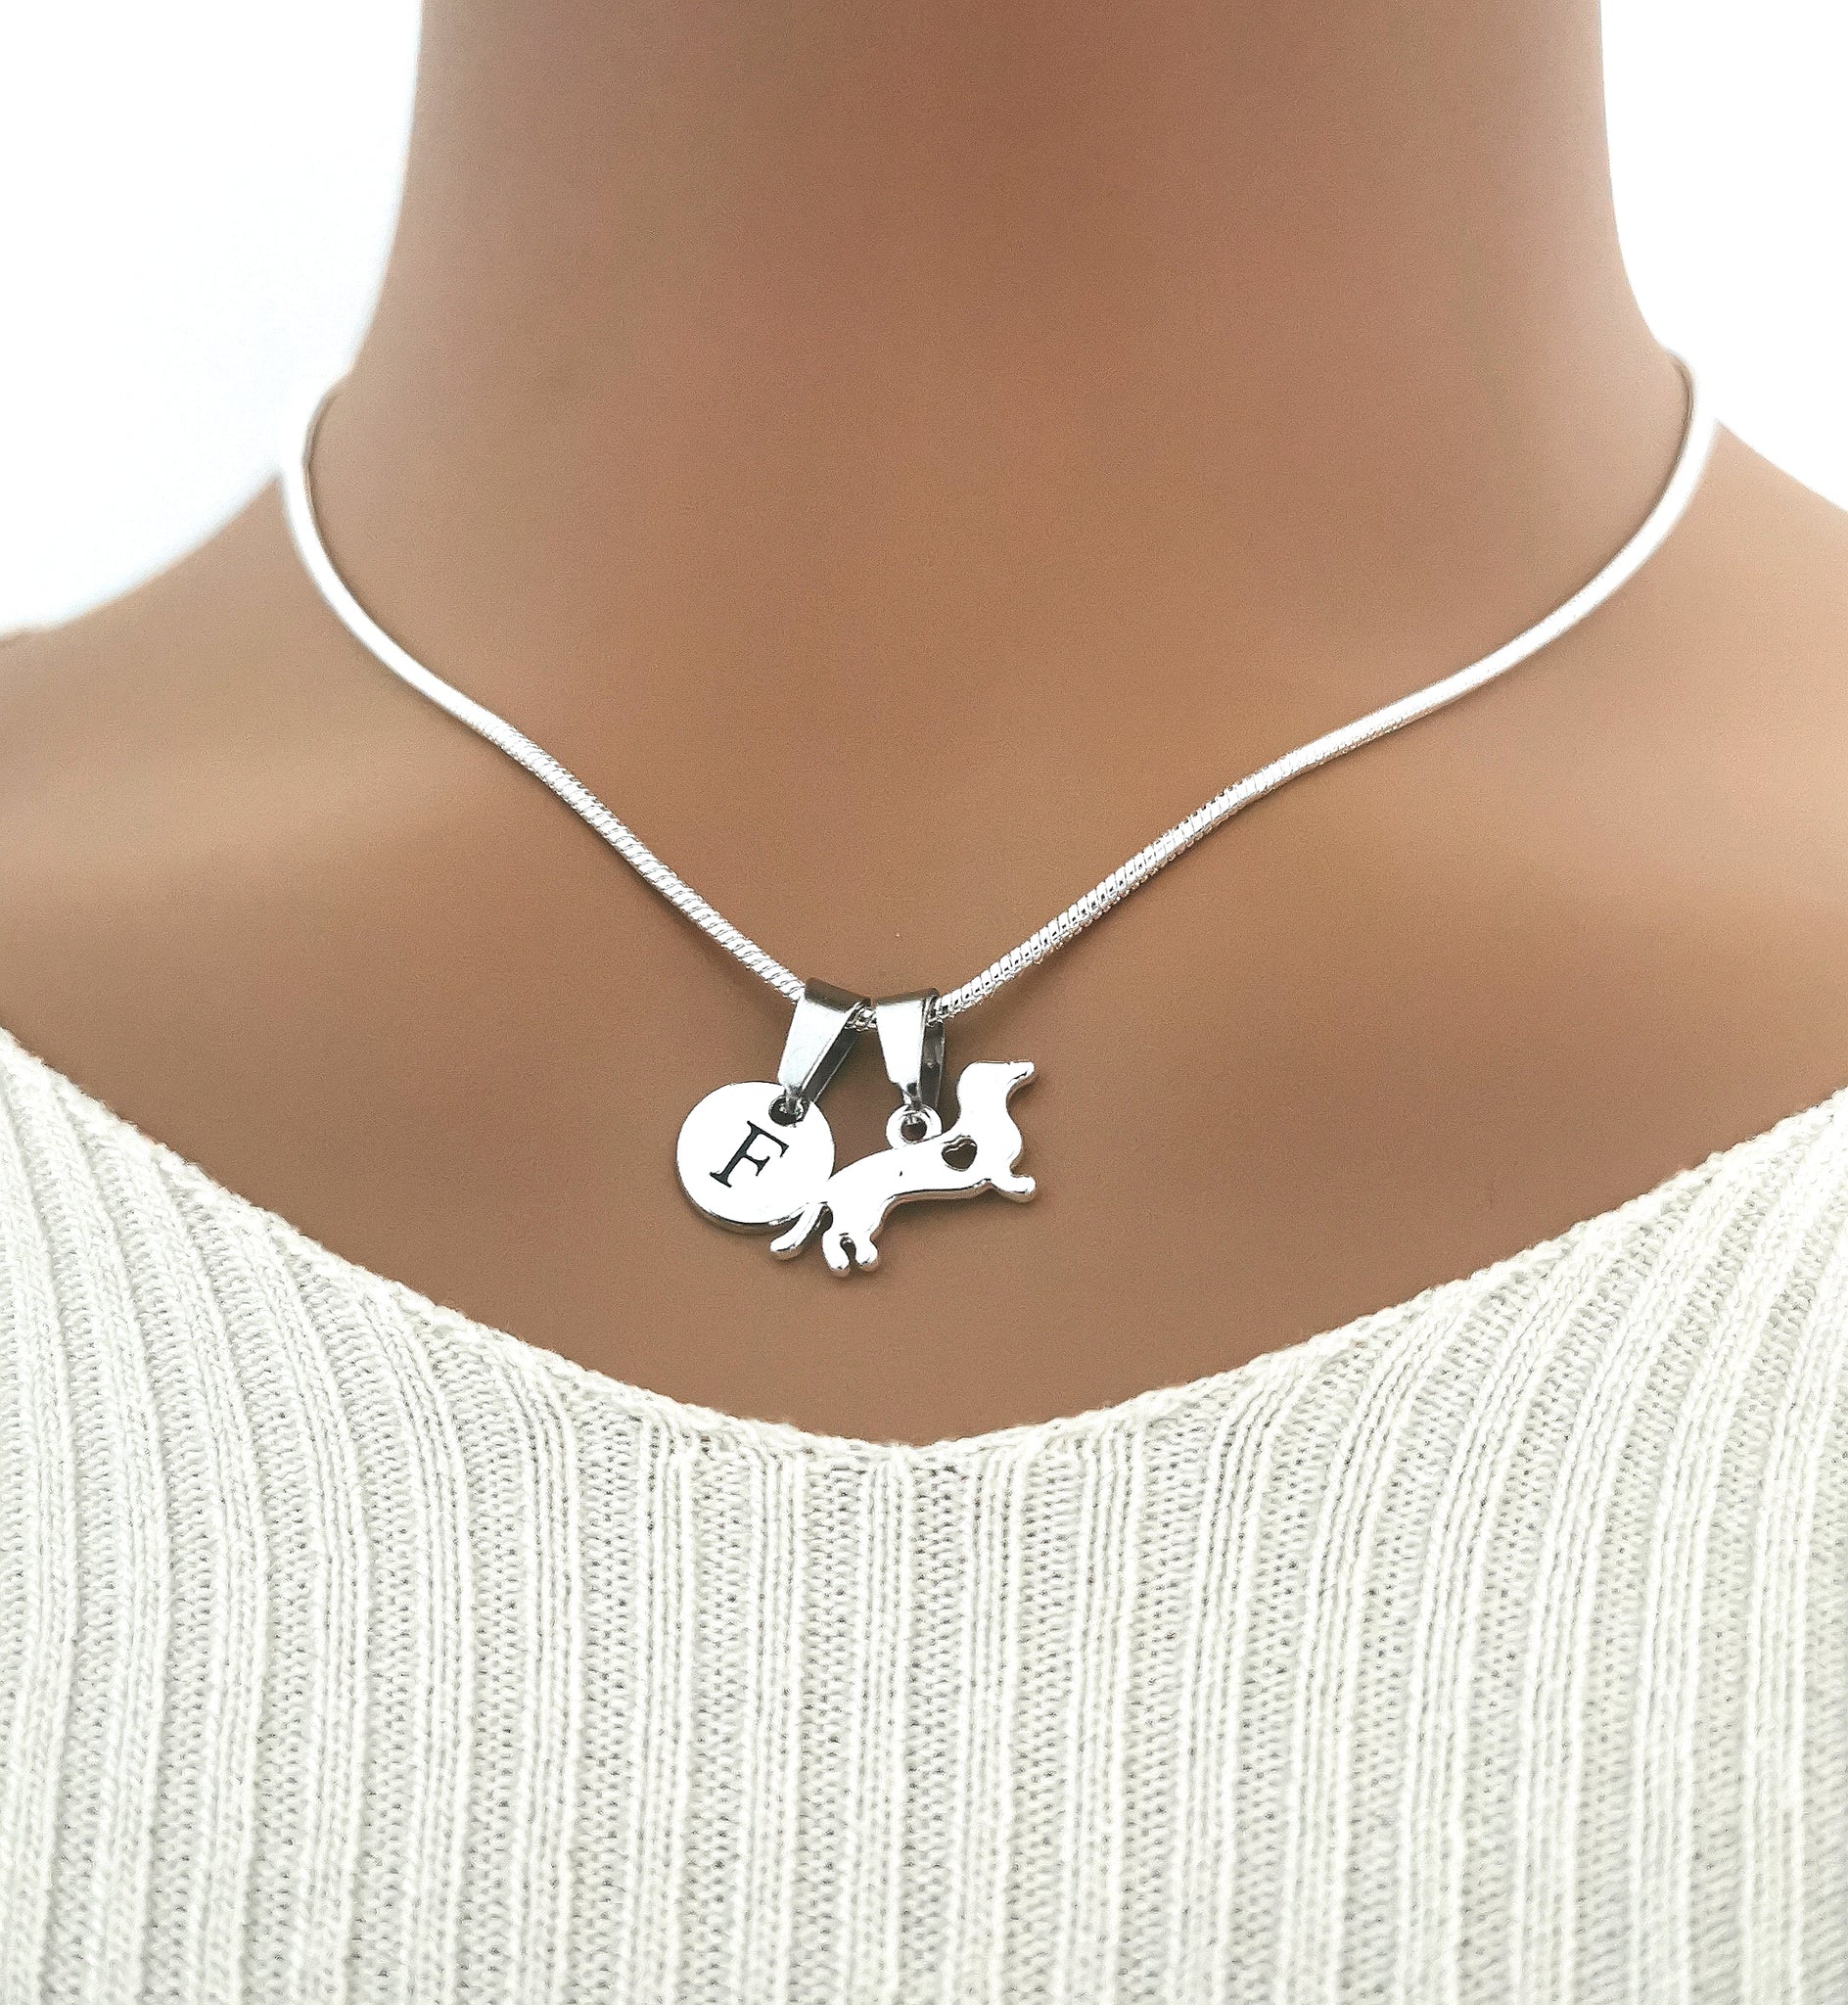 Silver Dachshund Necklace with Intricate Design - Ideal Dog Charm Gift for Her